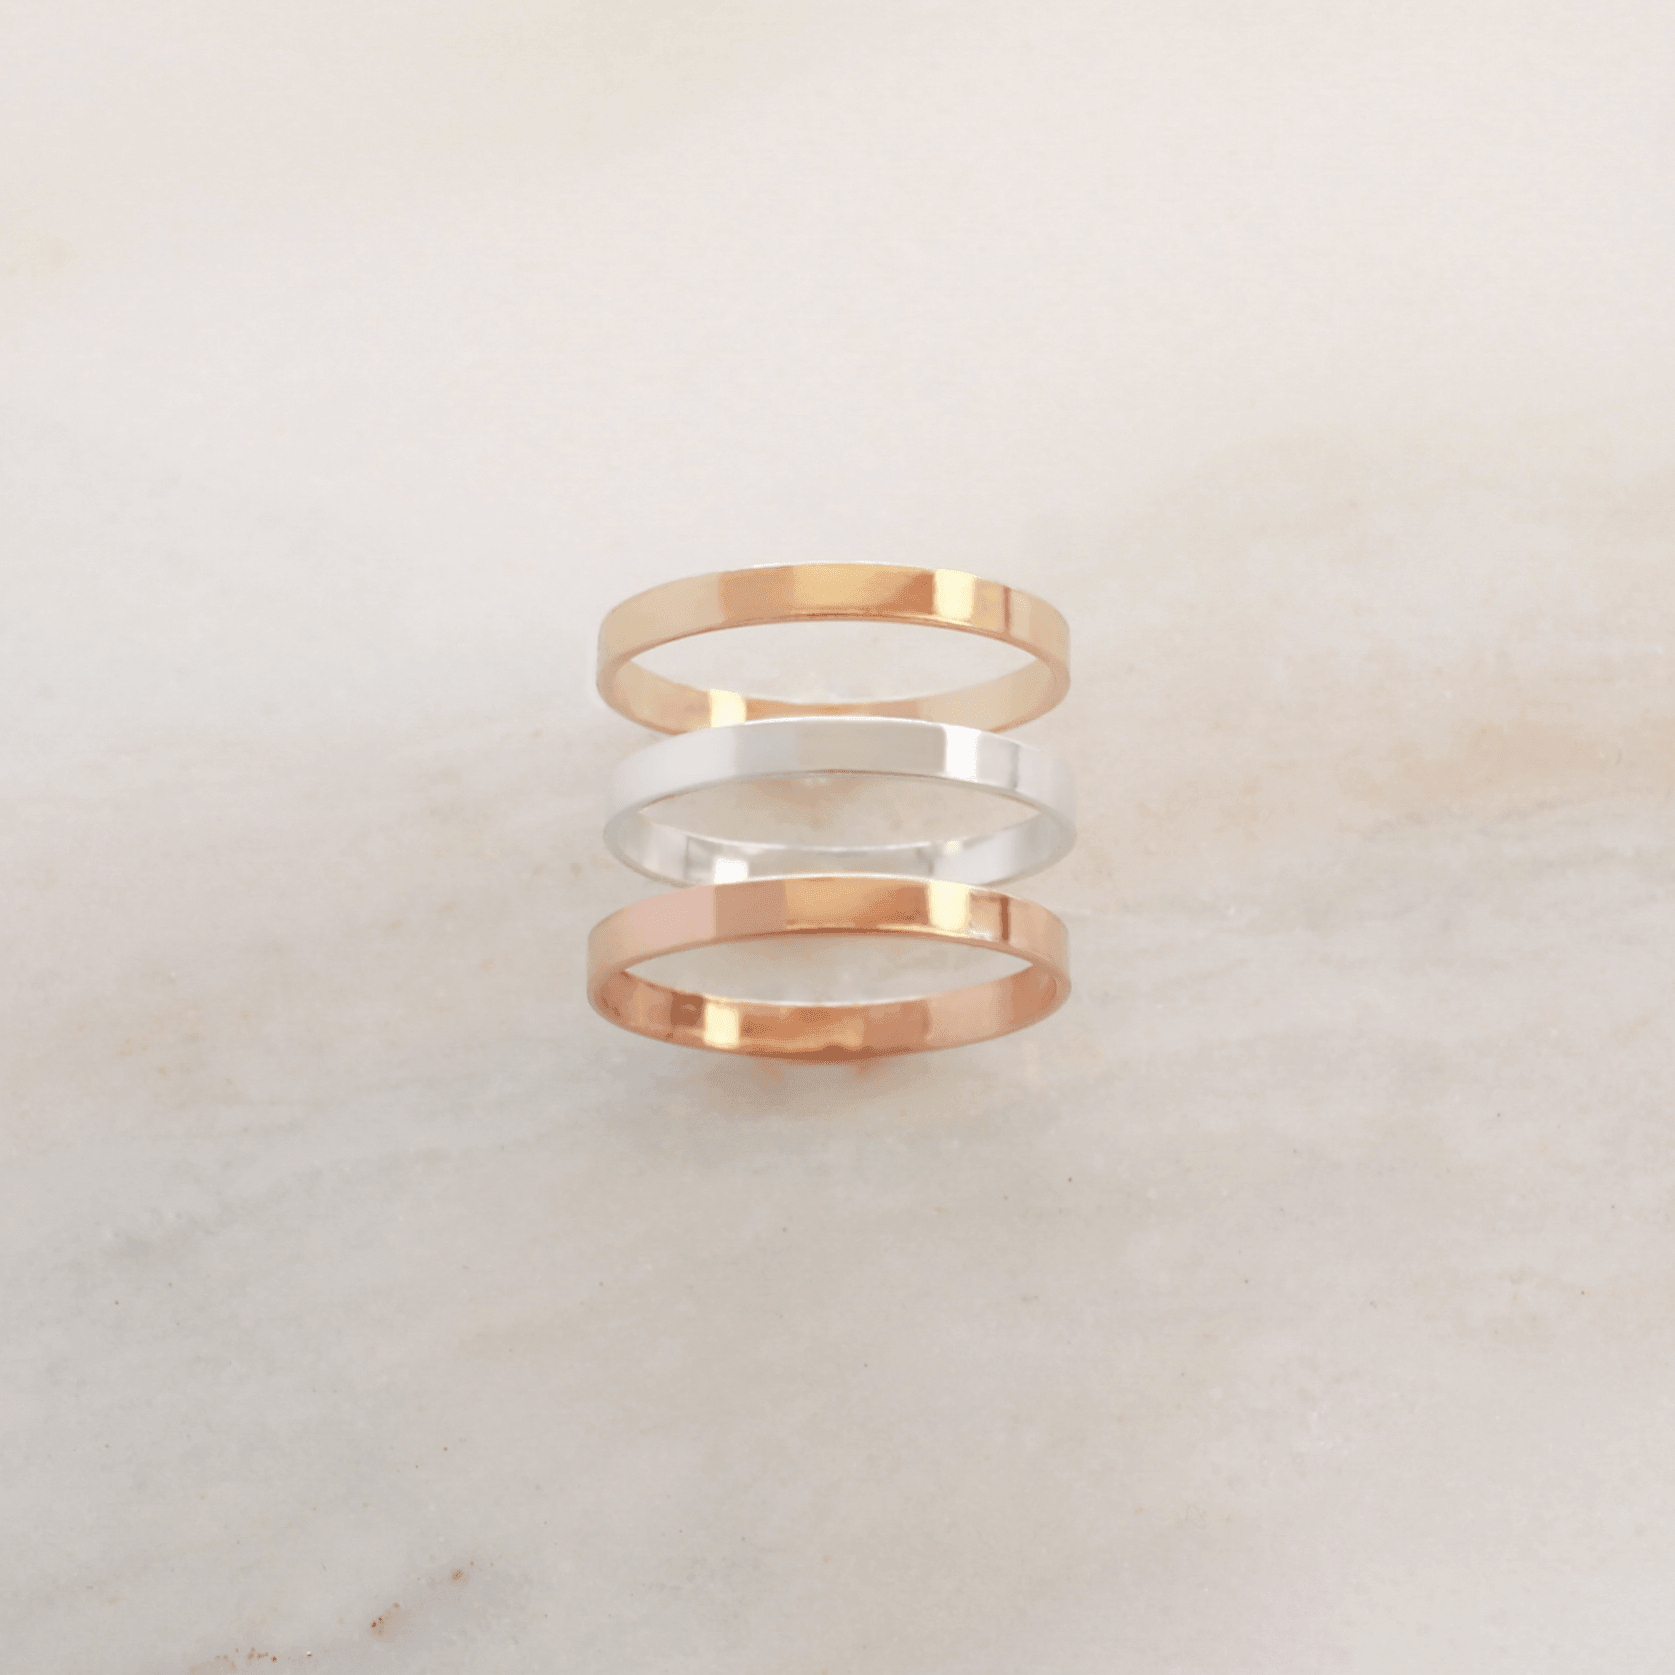 Elsie Ring - Nolia Jewelry - Meaningful + Sustainably Handcrafted Jewelry